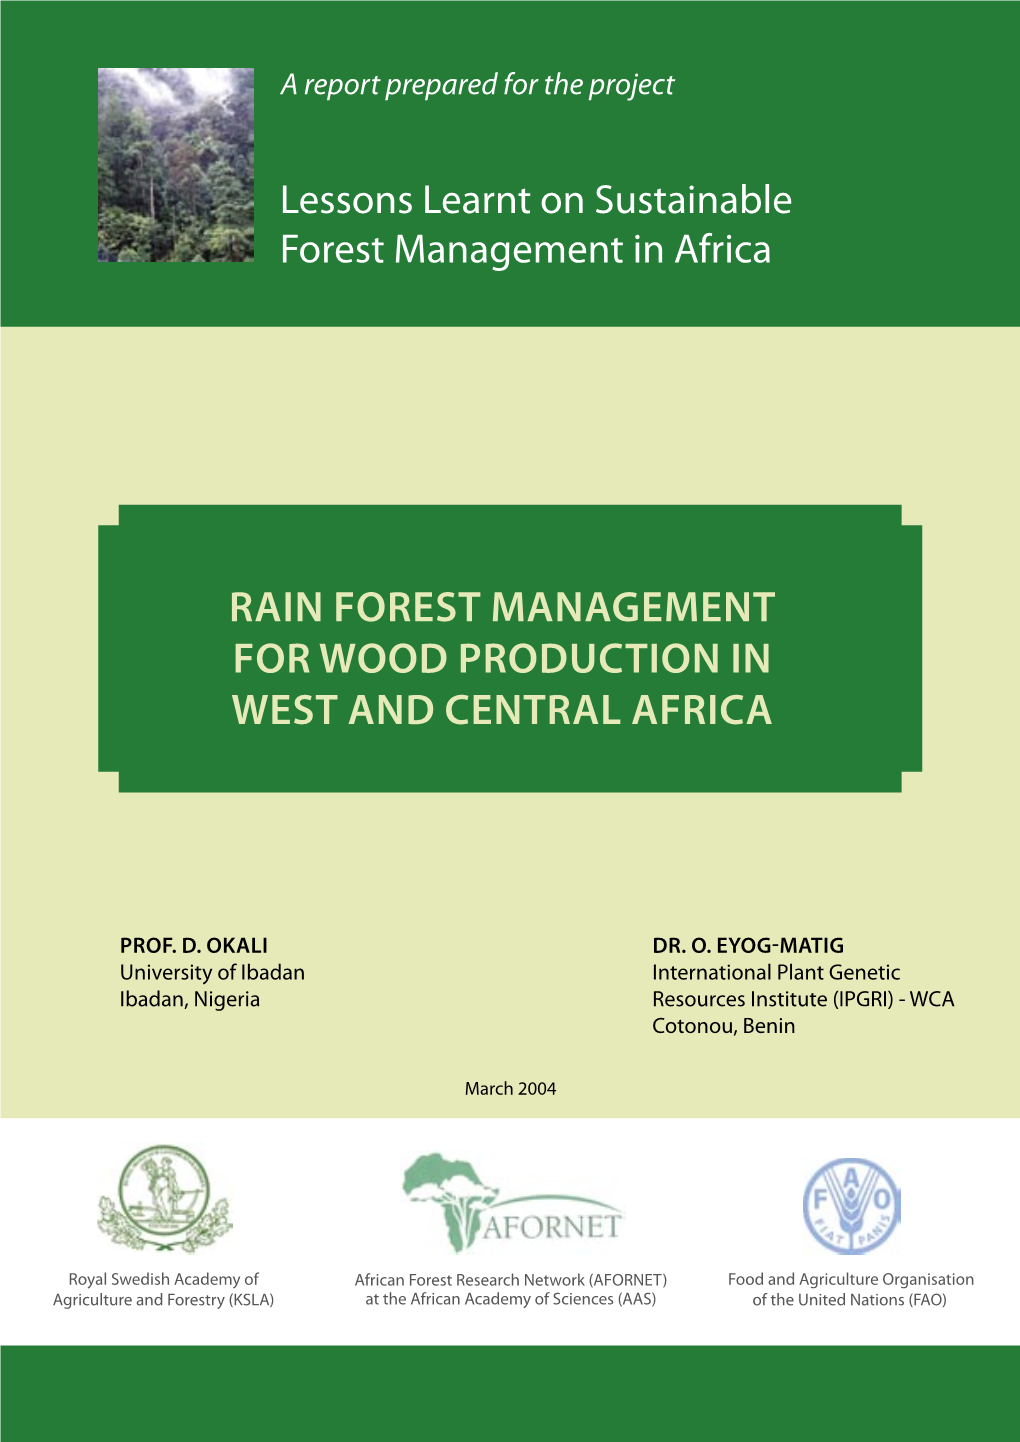 Rain Forest Management for Wood Production in West and Central Africa